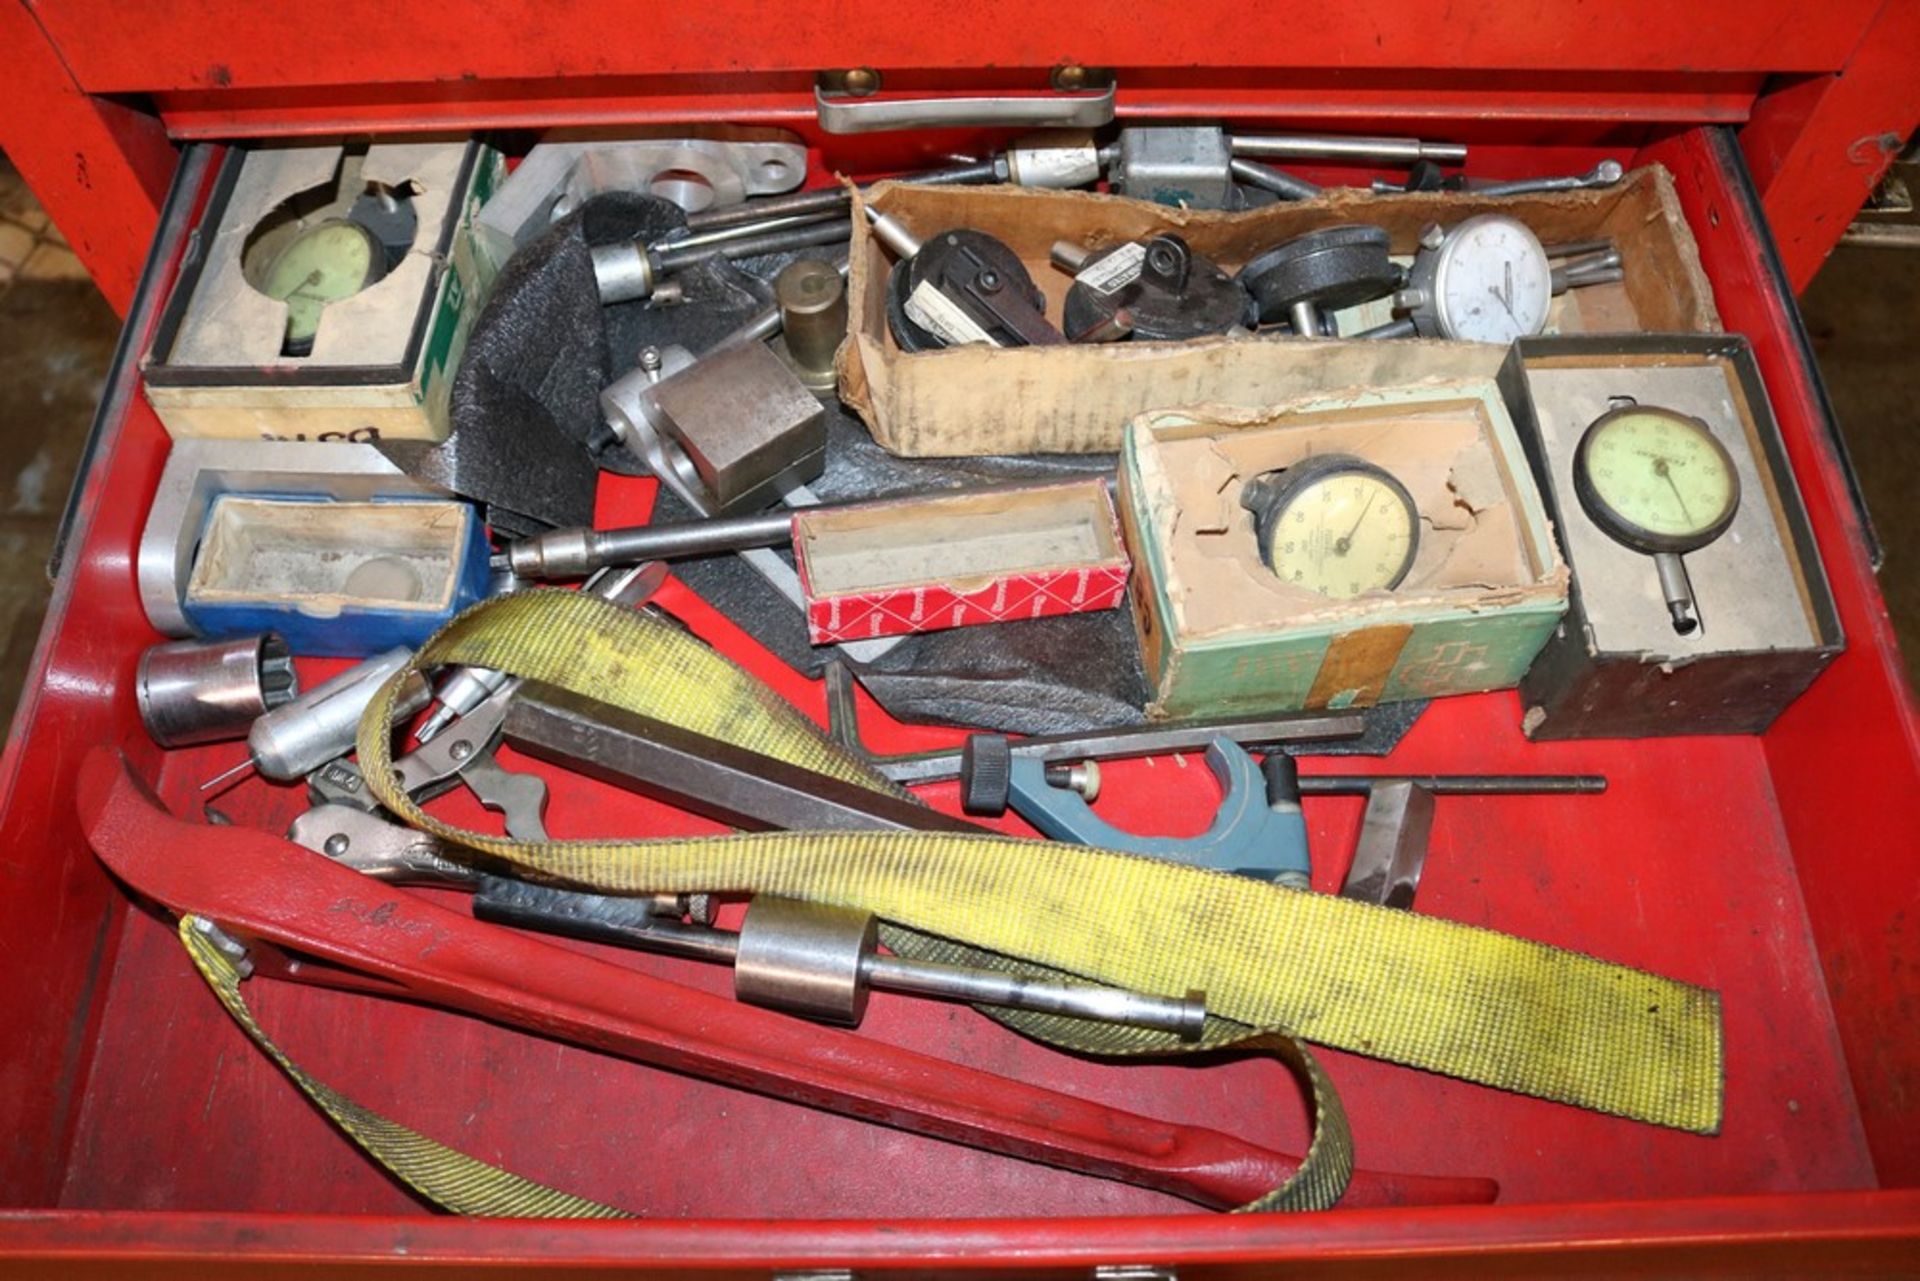 Stackon Rolling Tool Box with Contents "Pnuematic Tools, Tooling, Handtools and Others" - Image 7 of 8